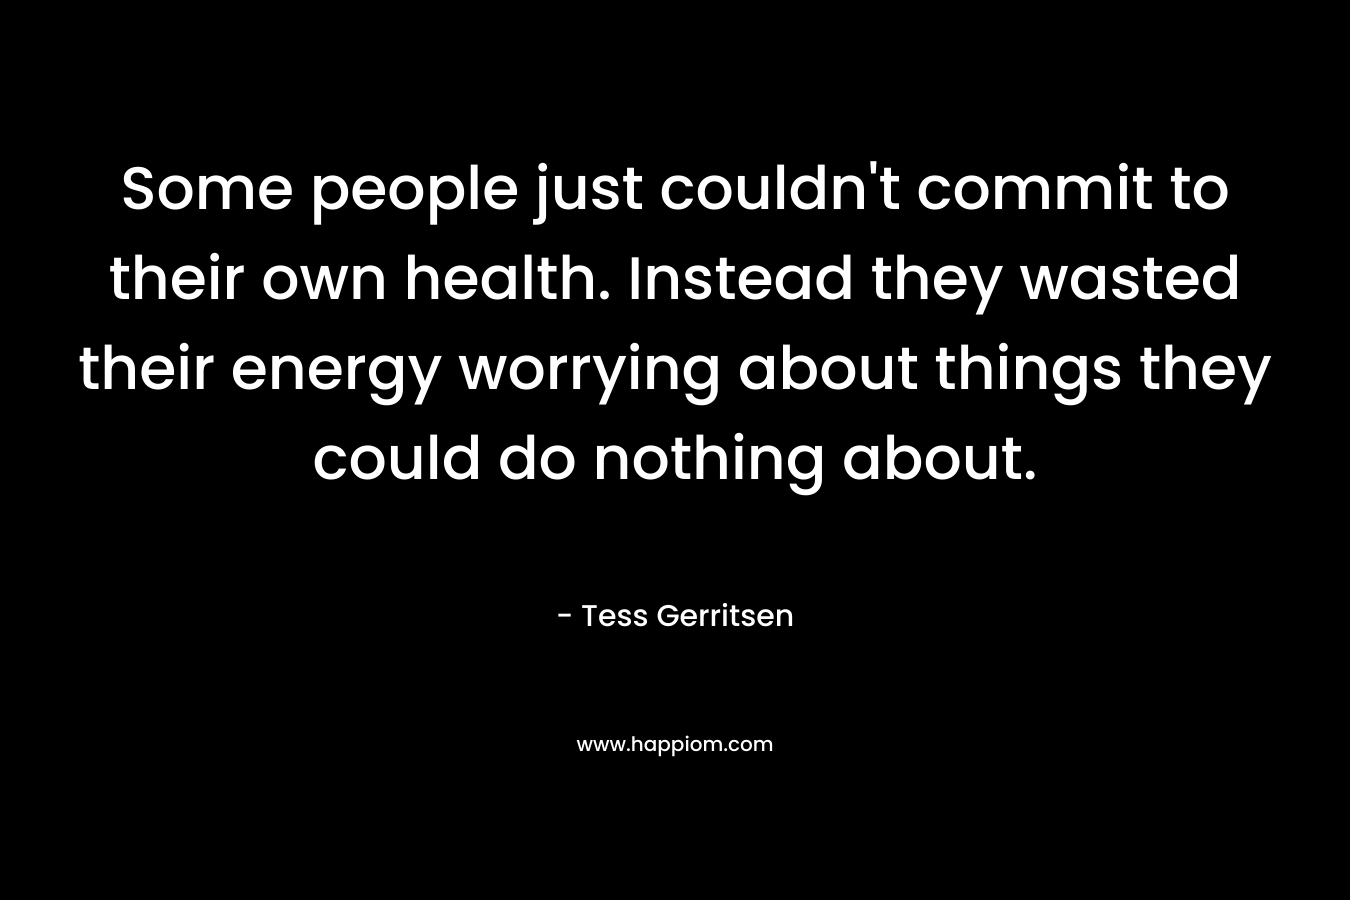 Some people just couldn’t commit to their own health. Instead they wasted their energy worrying about things they could do nothing about. – Tess Gerritsen